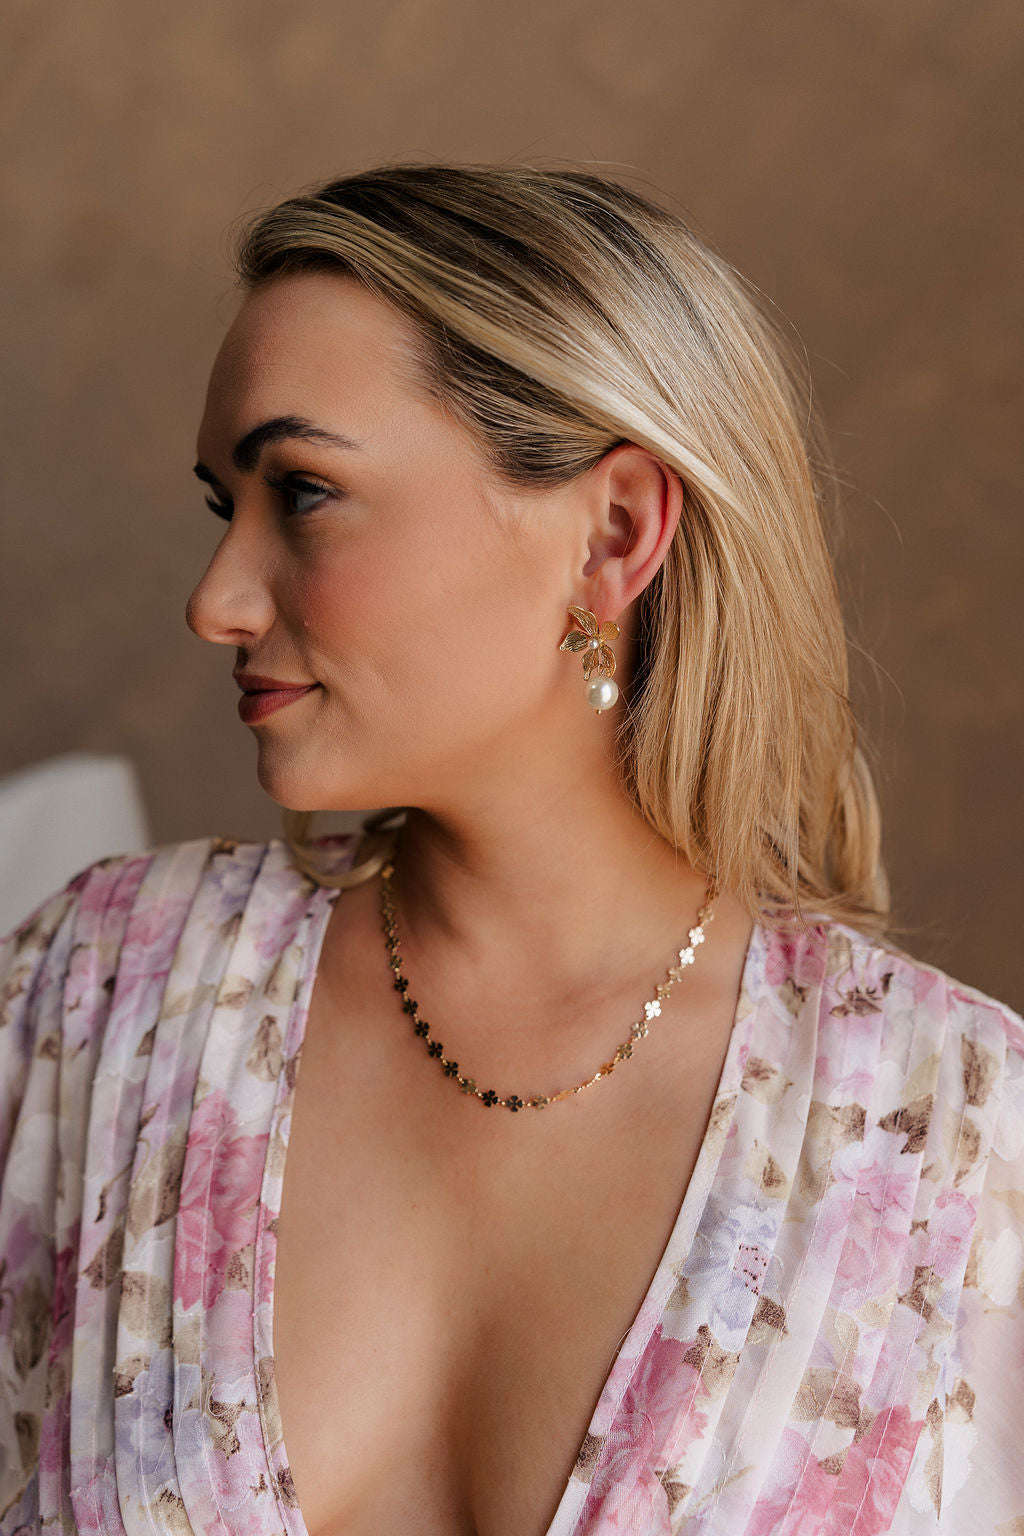 Side view of female model wearing the Angelica Gold Clover Necklace which features gold mini clovers linked together with an adjustable clasp closure